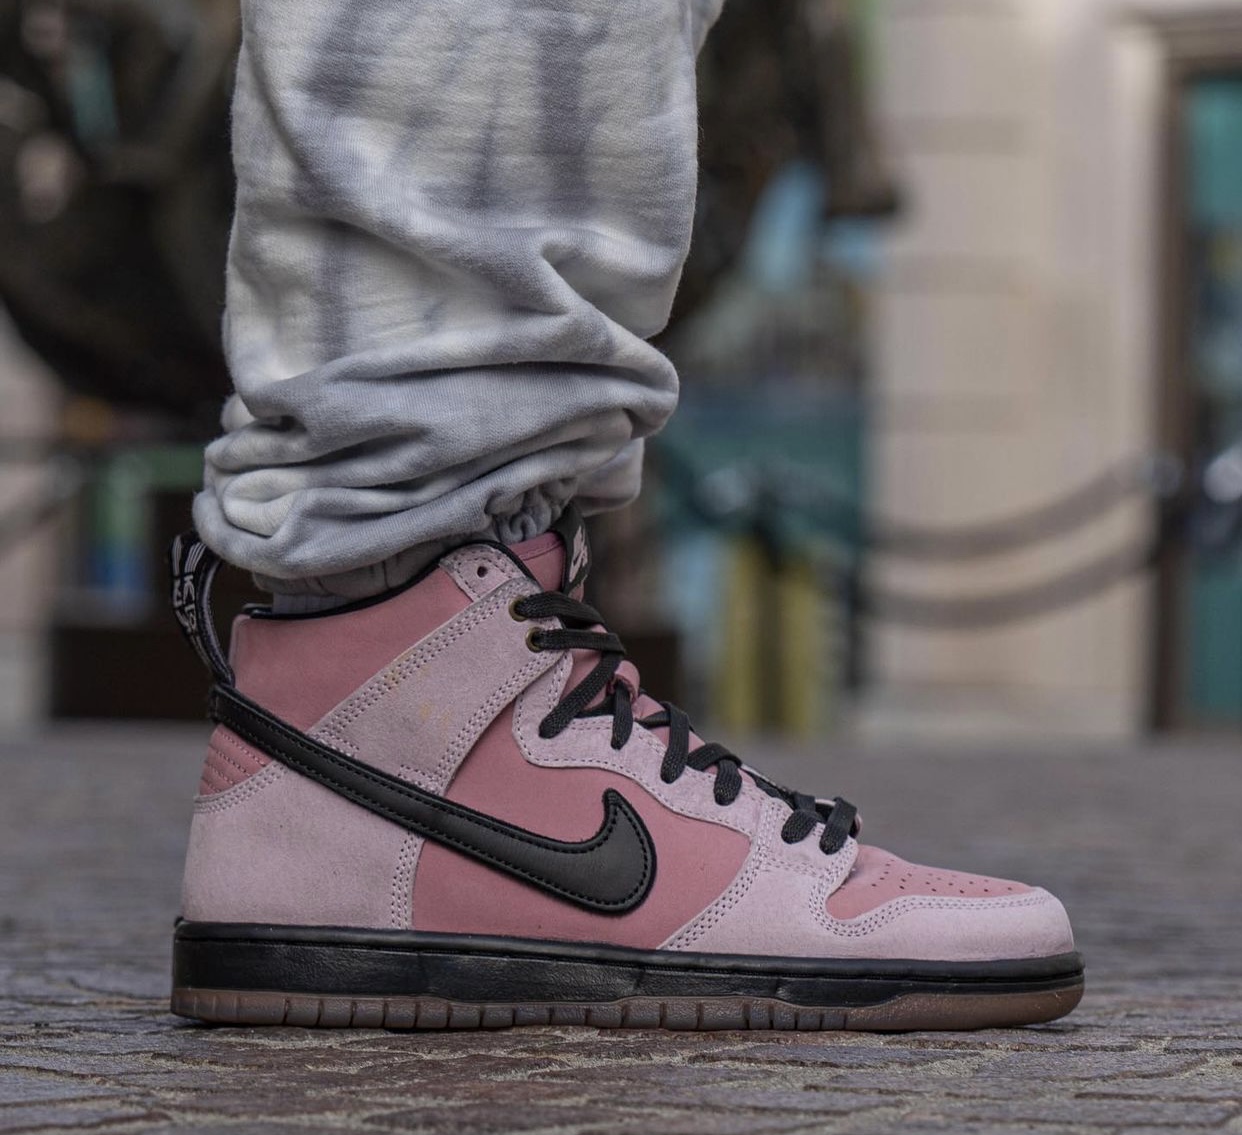 KCDC Nike SB Dunk High DH7742 600 Release Date On Feet 1